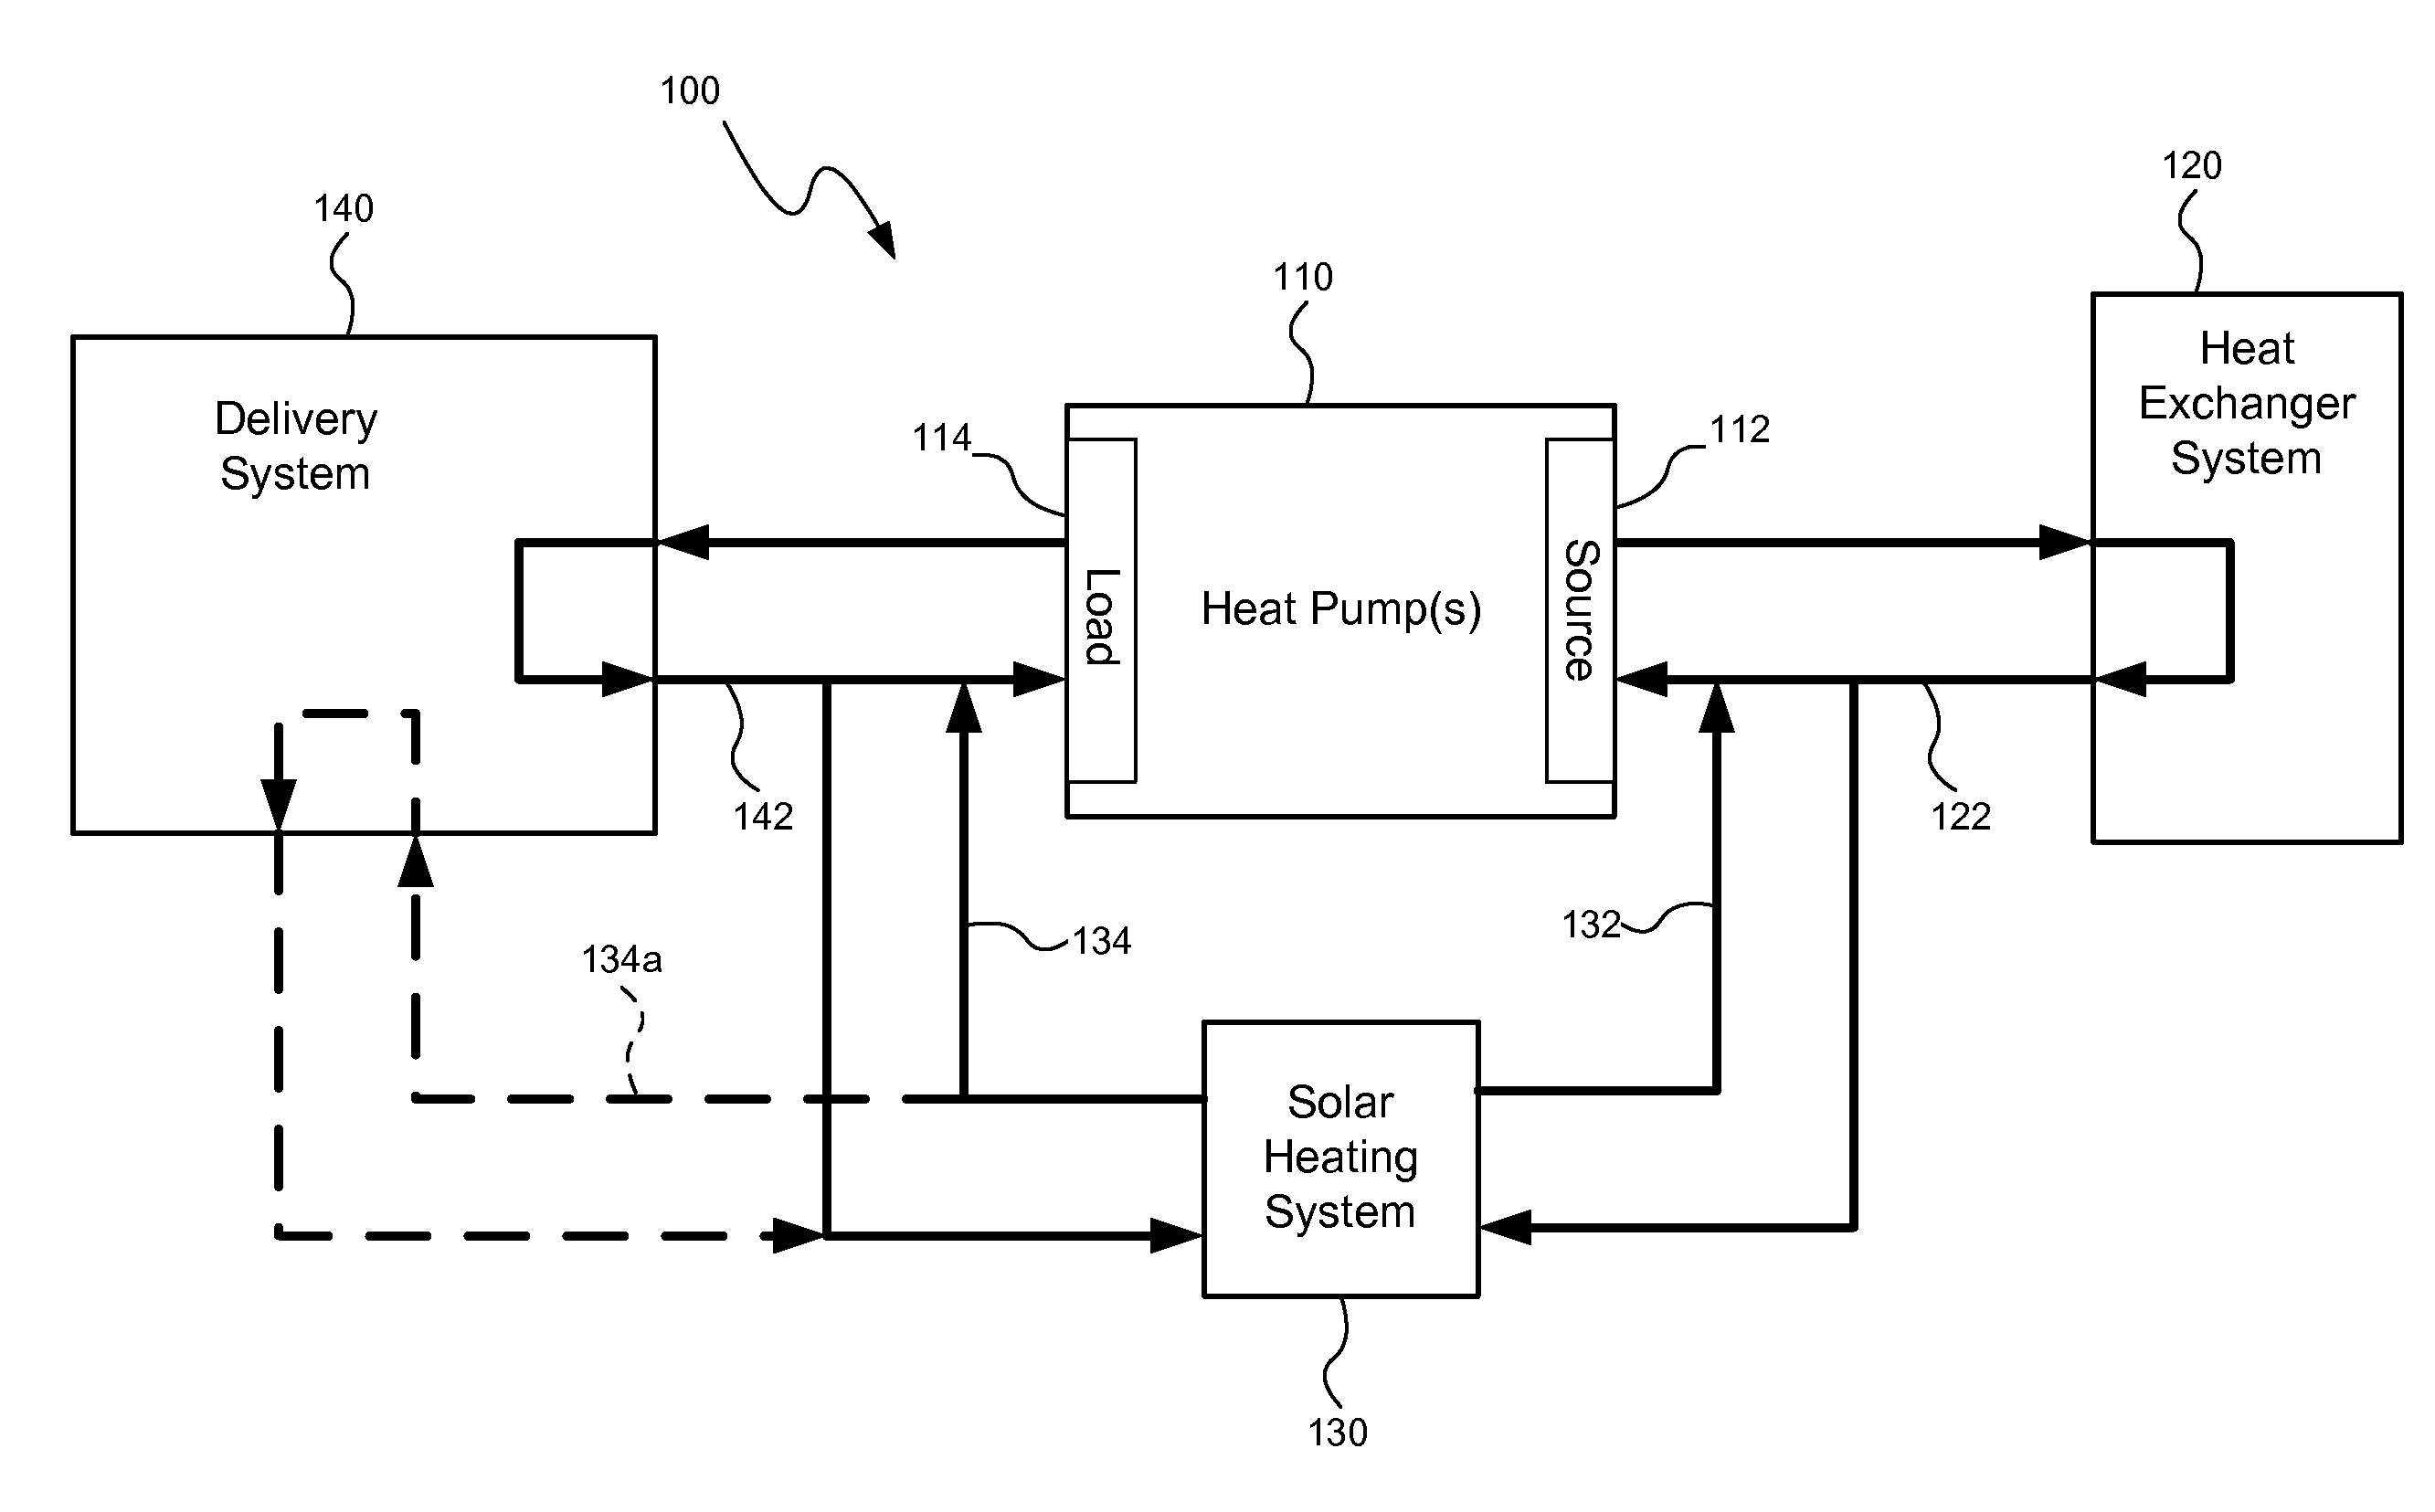 Hybrid heating and/or cooling system